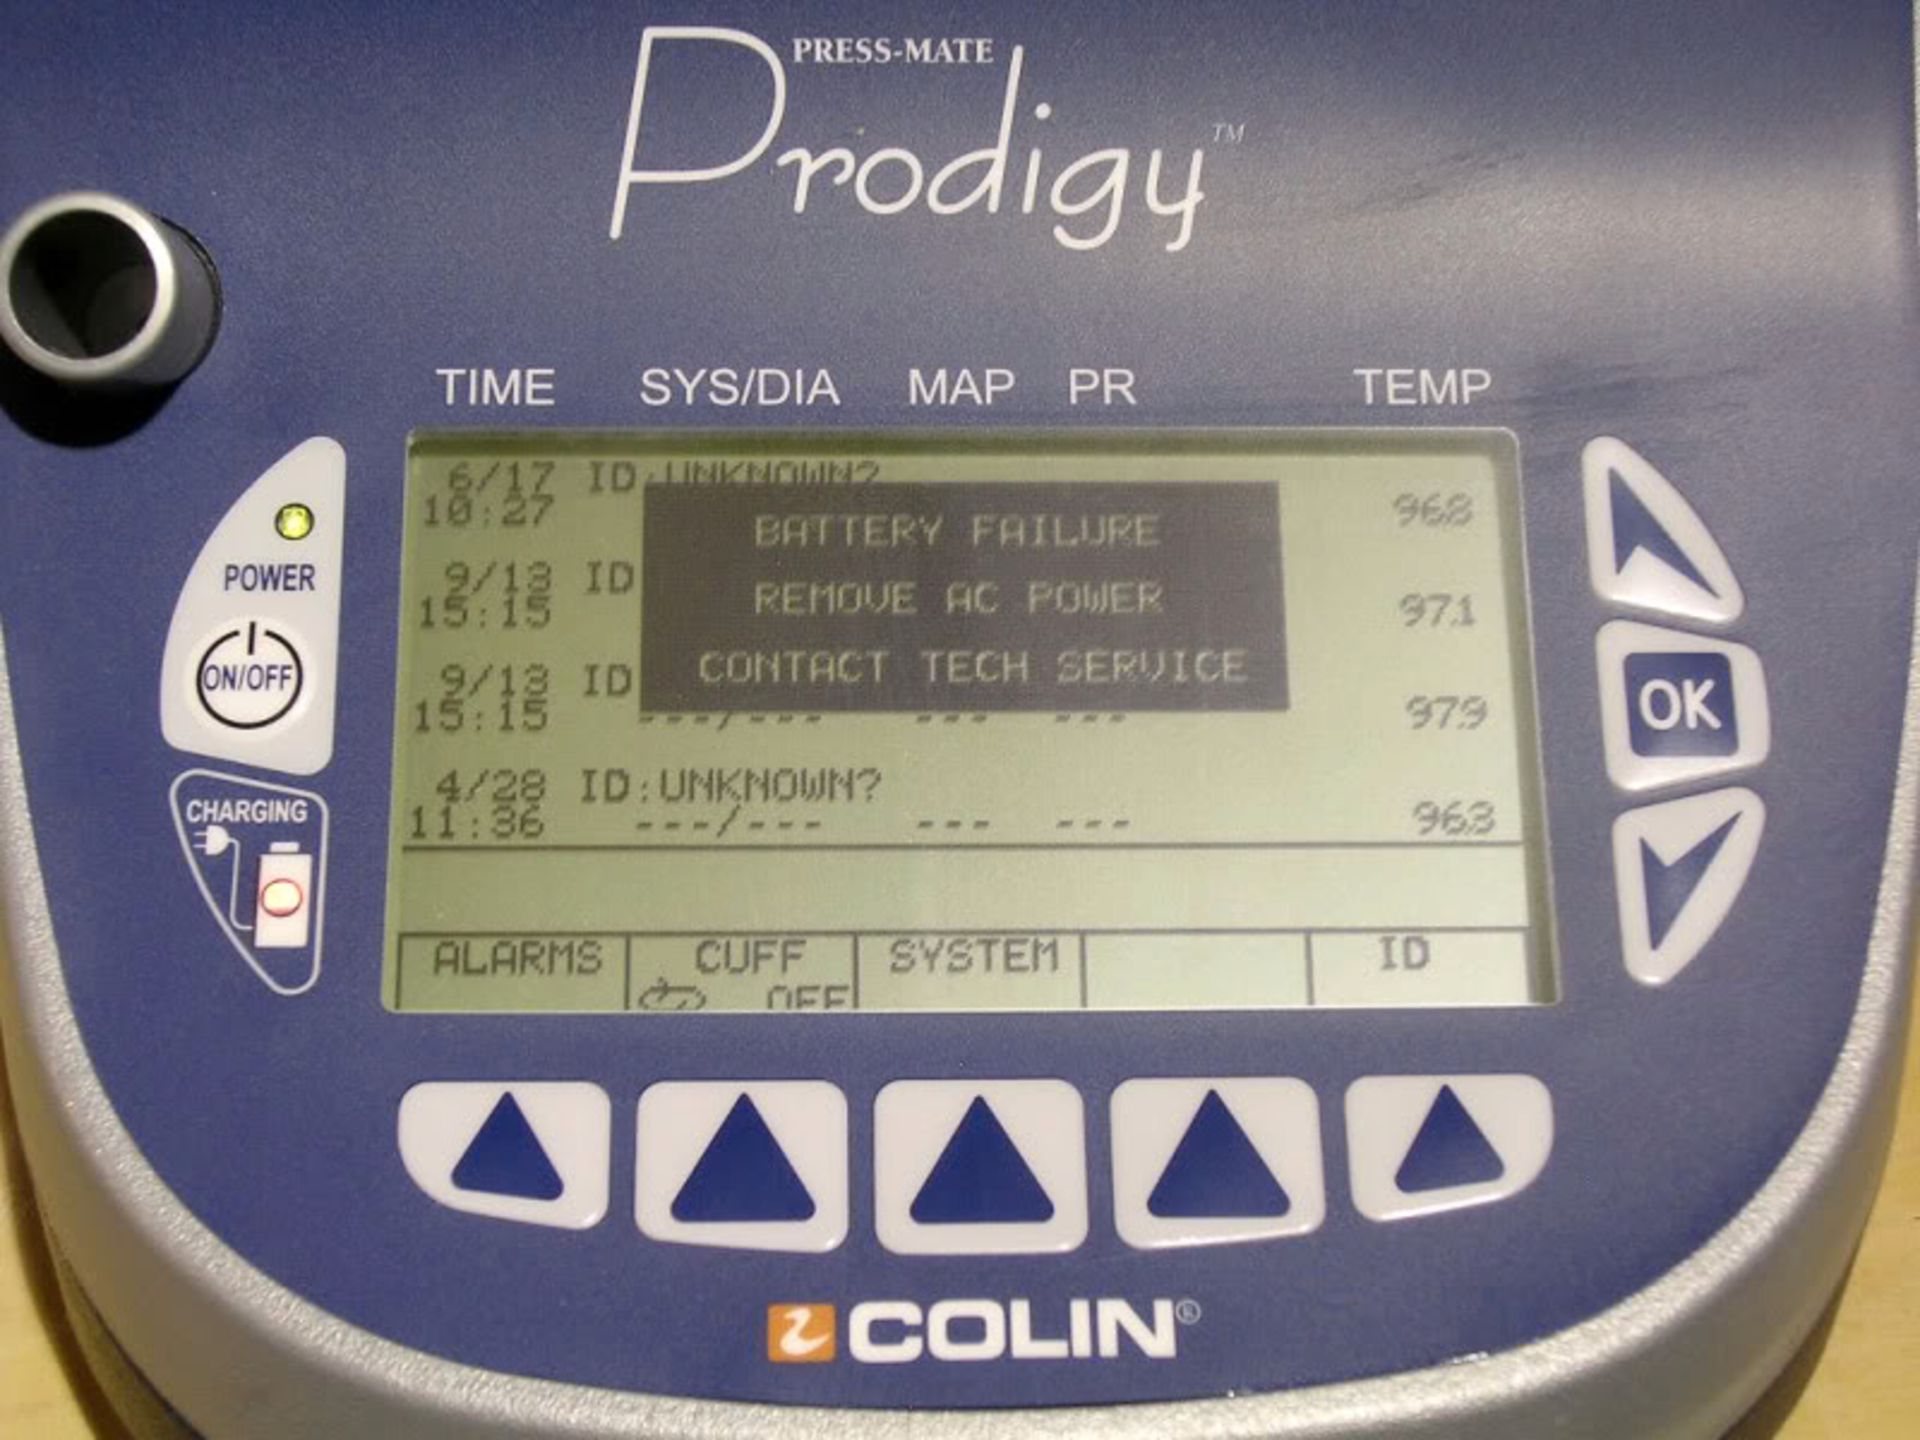 Colin/ Press-Mate, Prodigy Patient Monitor, Model 2120, Qty 1, 220691980619 - Image 4 of 8